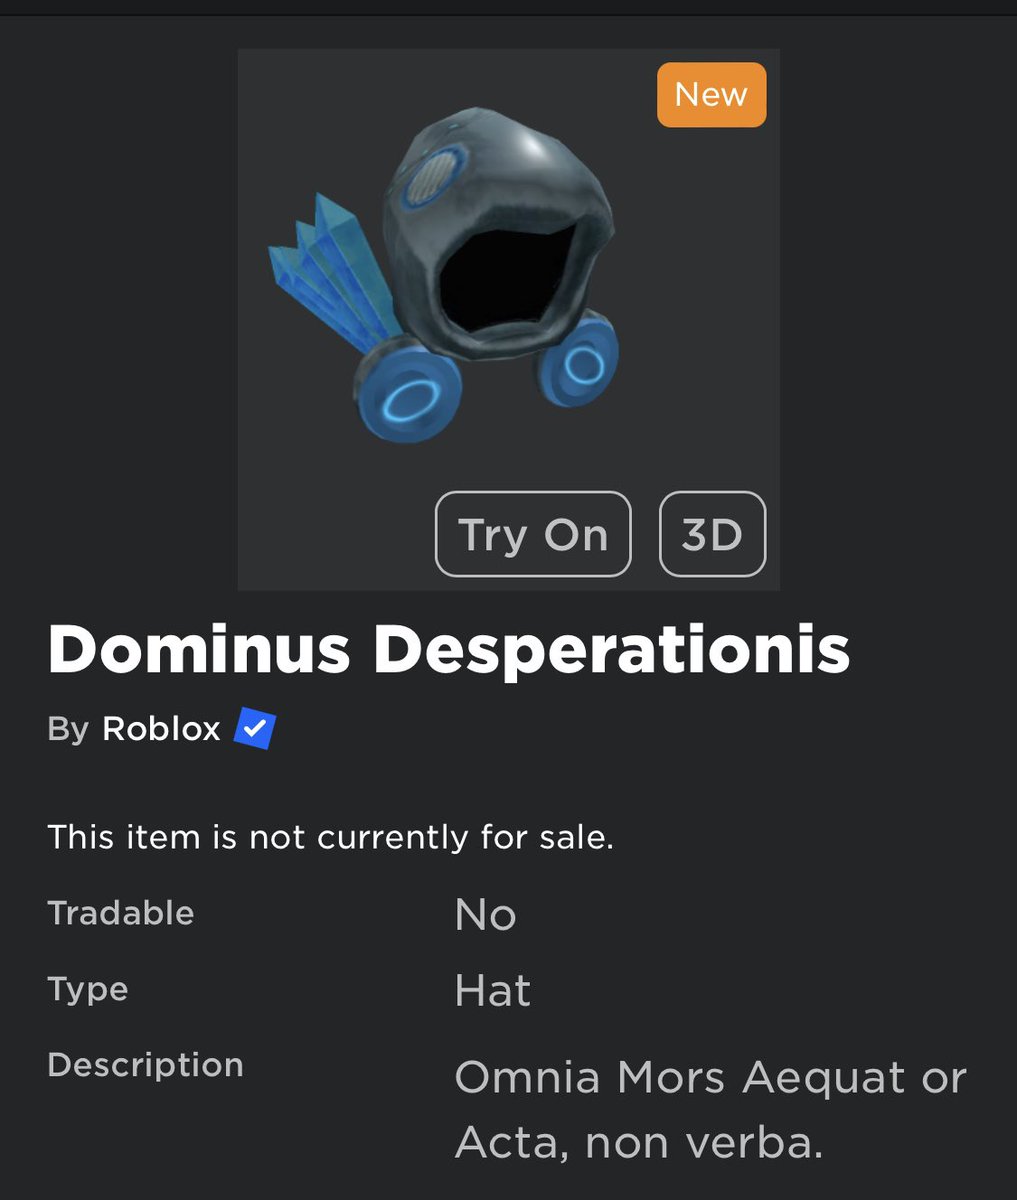 Trade with ROBLOX Items you gave Summertime 2009 599 Total Value: Items you  received Dominus Niggus 100,000,0. - iFunny Brazil